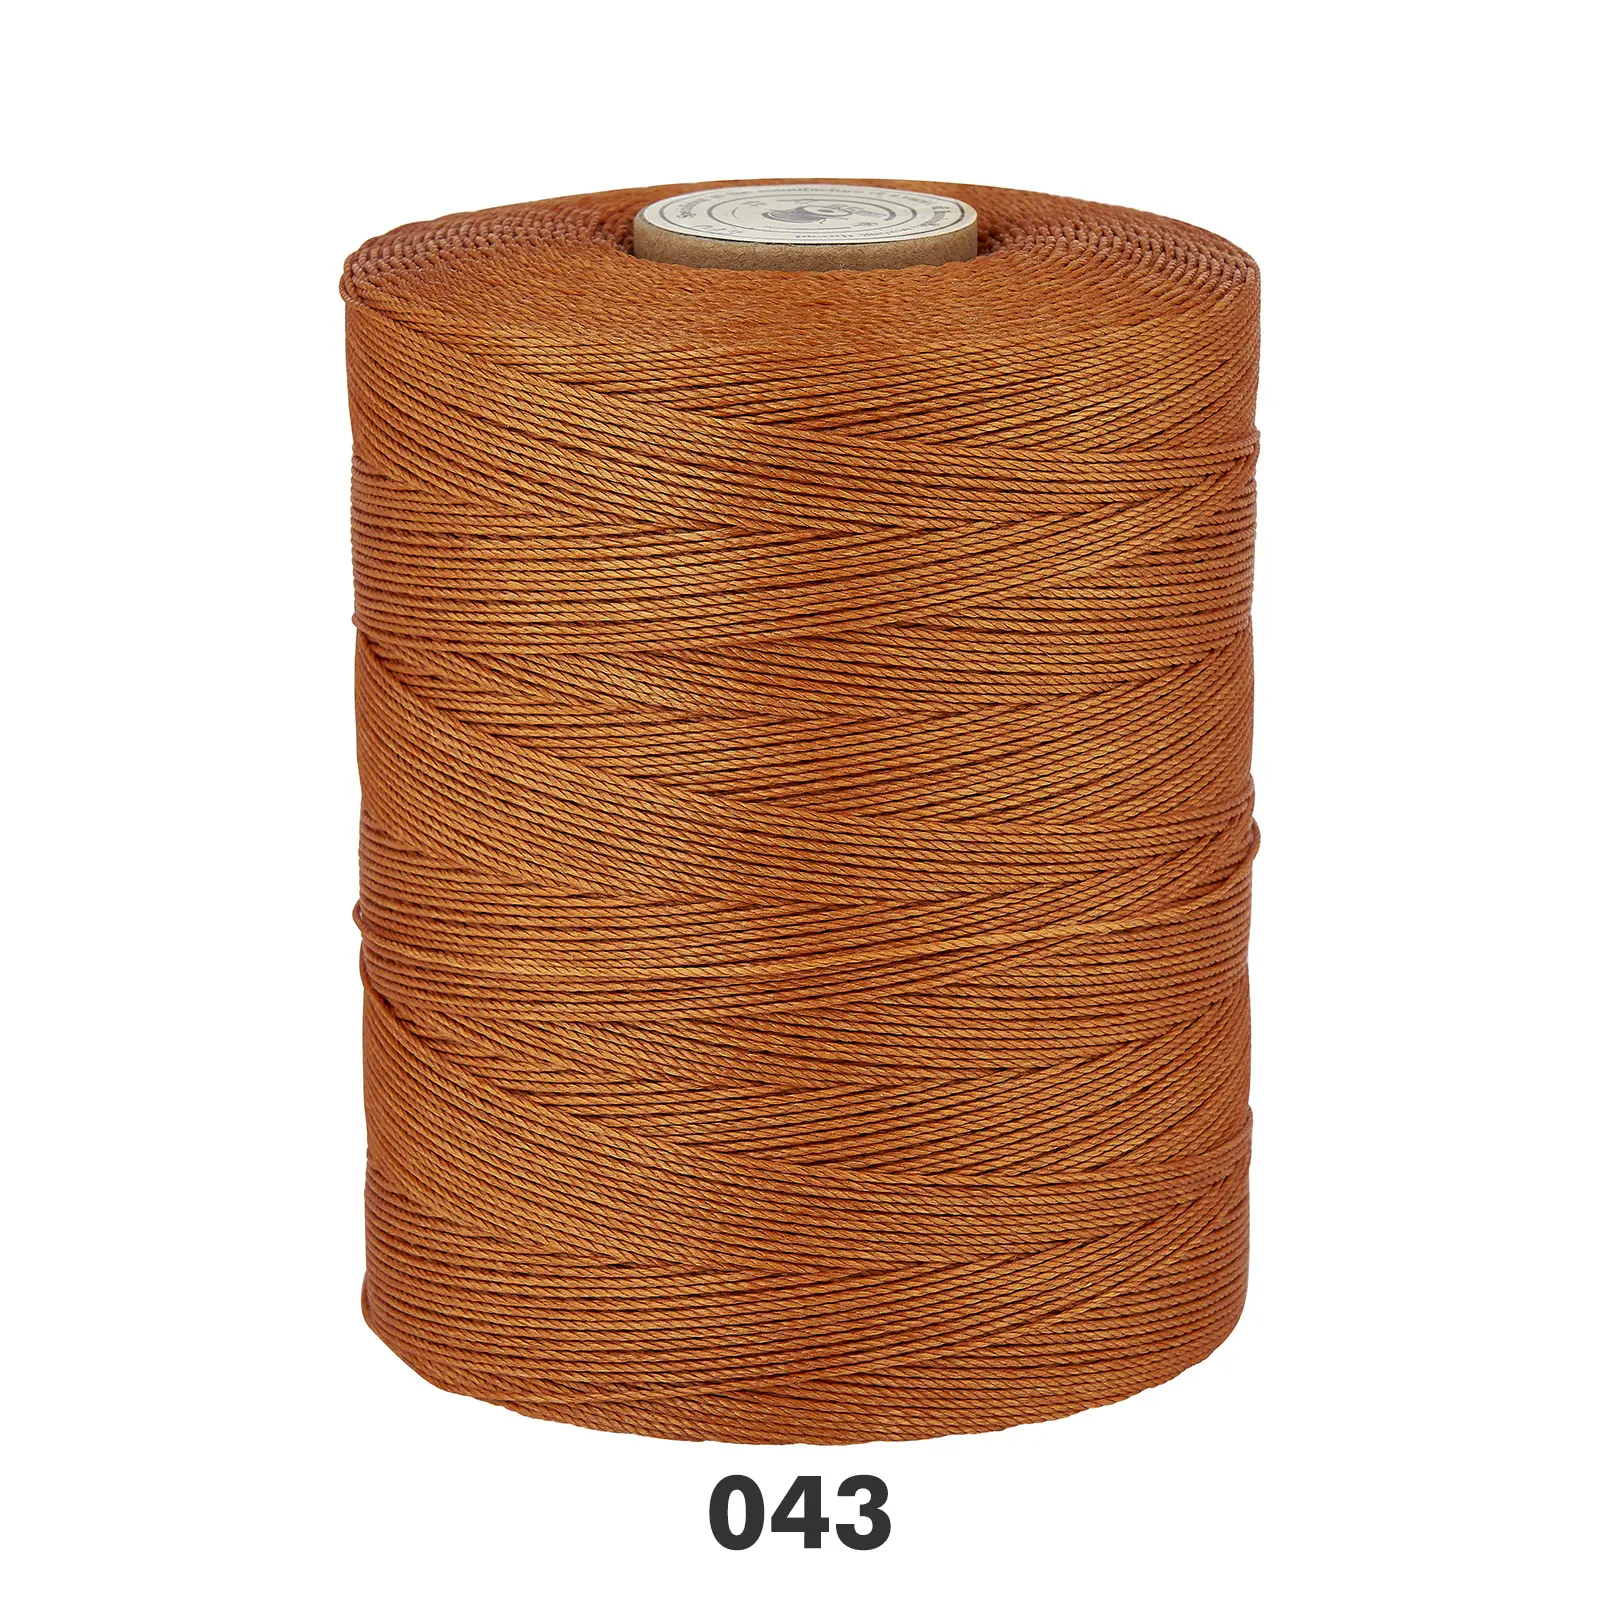 Wholesale 0.8mm Waxed Thread For Leather 500m Round Sewing Thread Polyester Braid High-Strength Handmade Leather Thread Wax